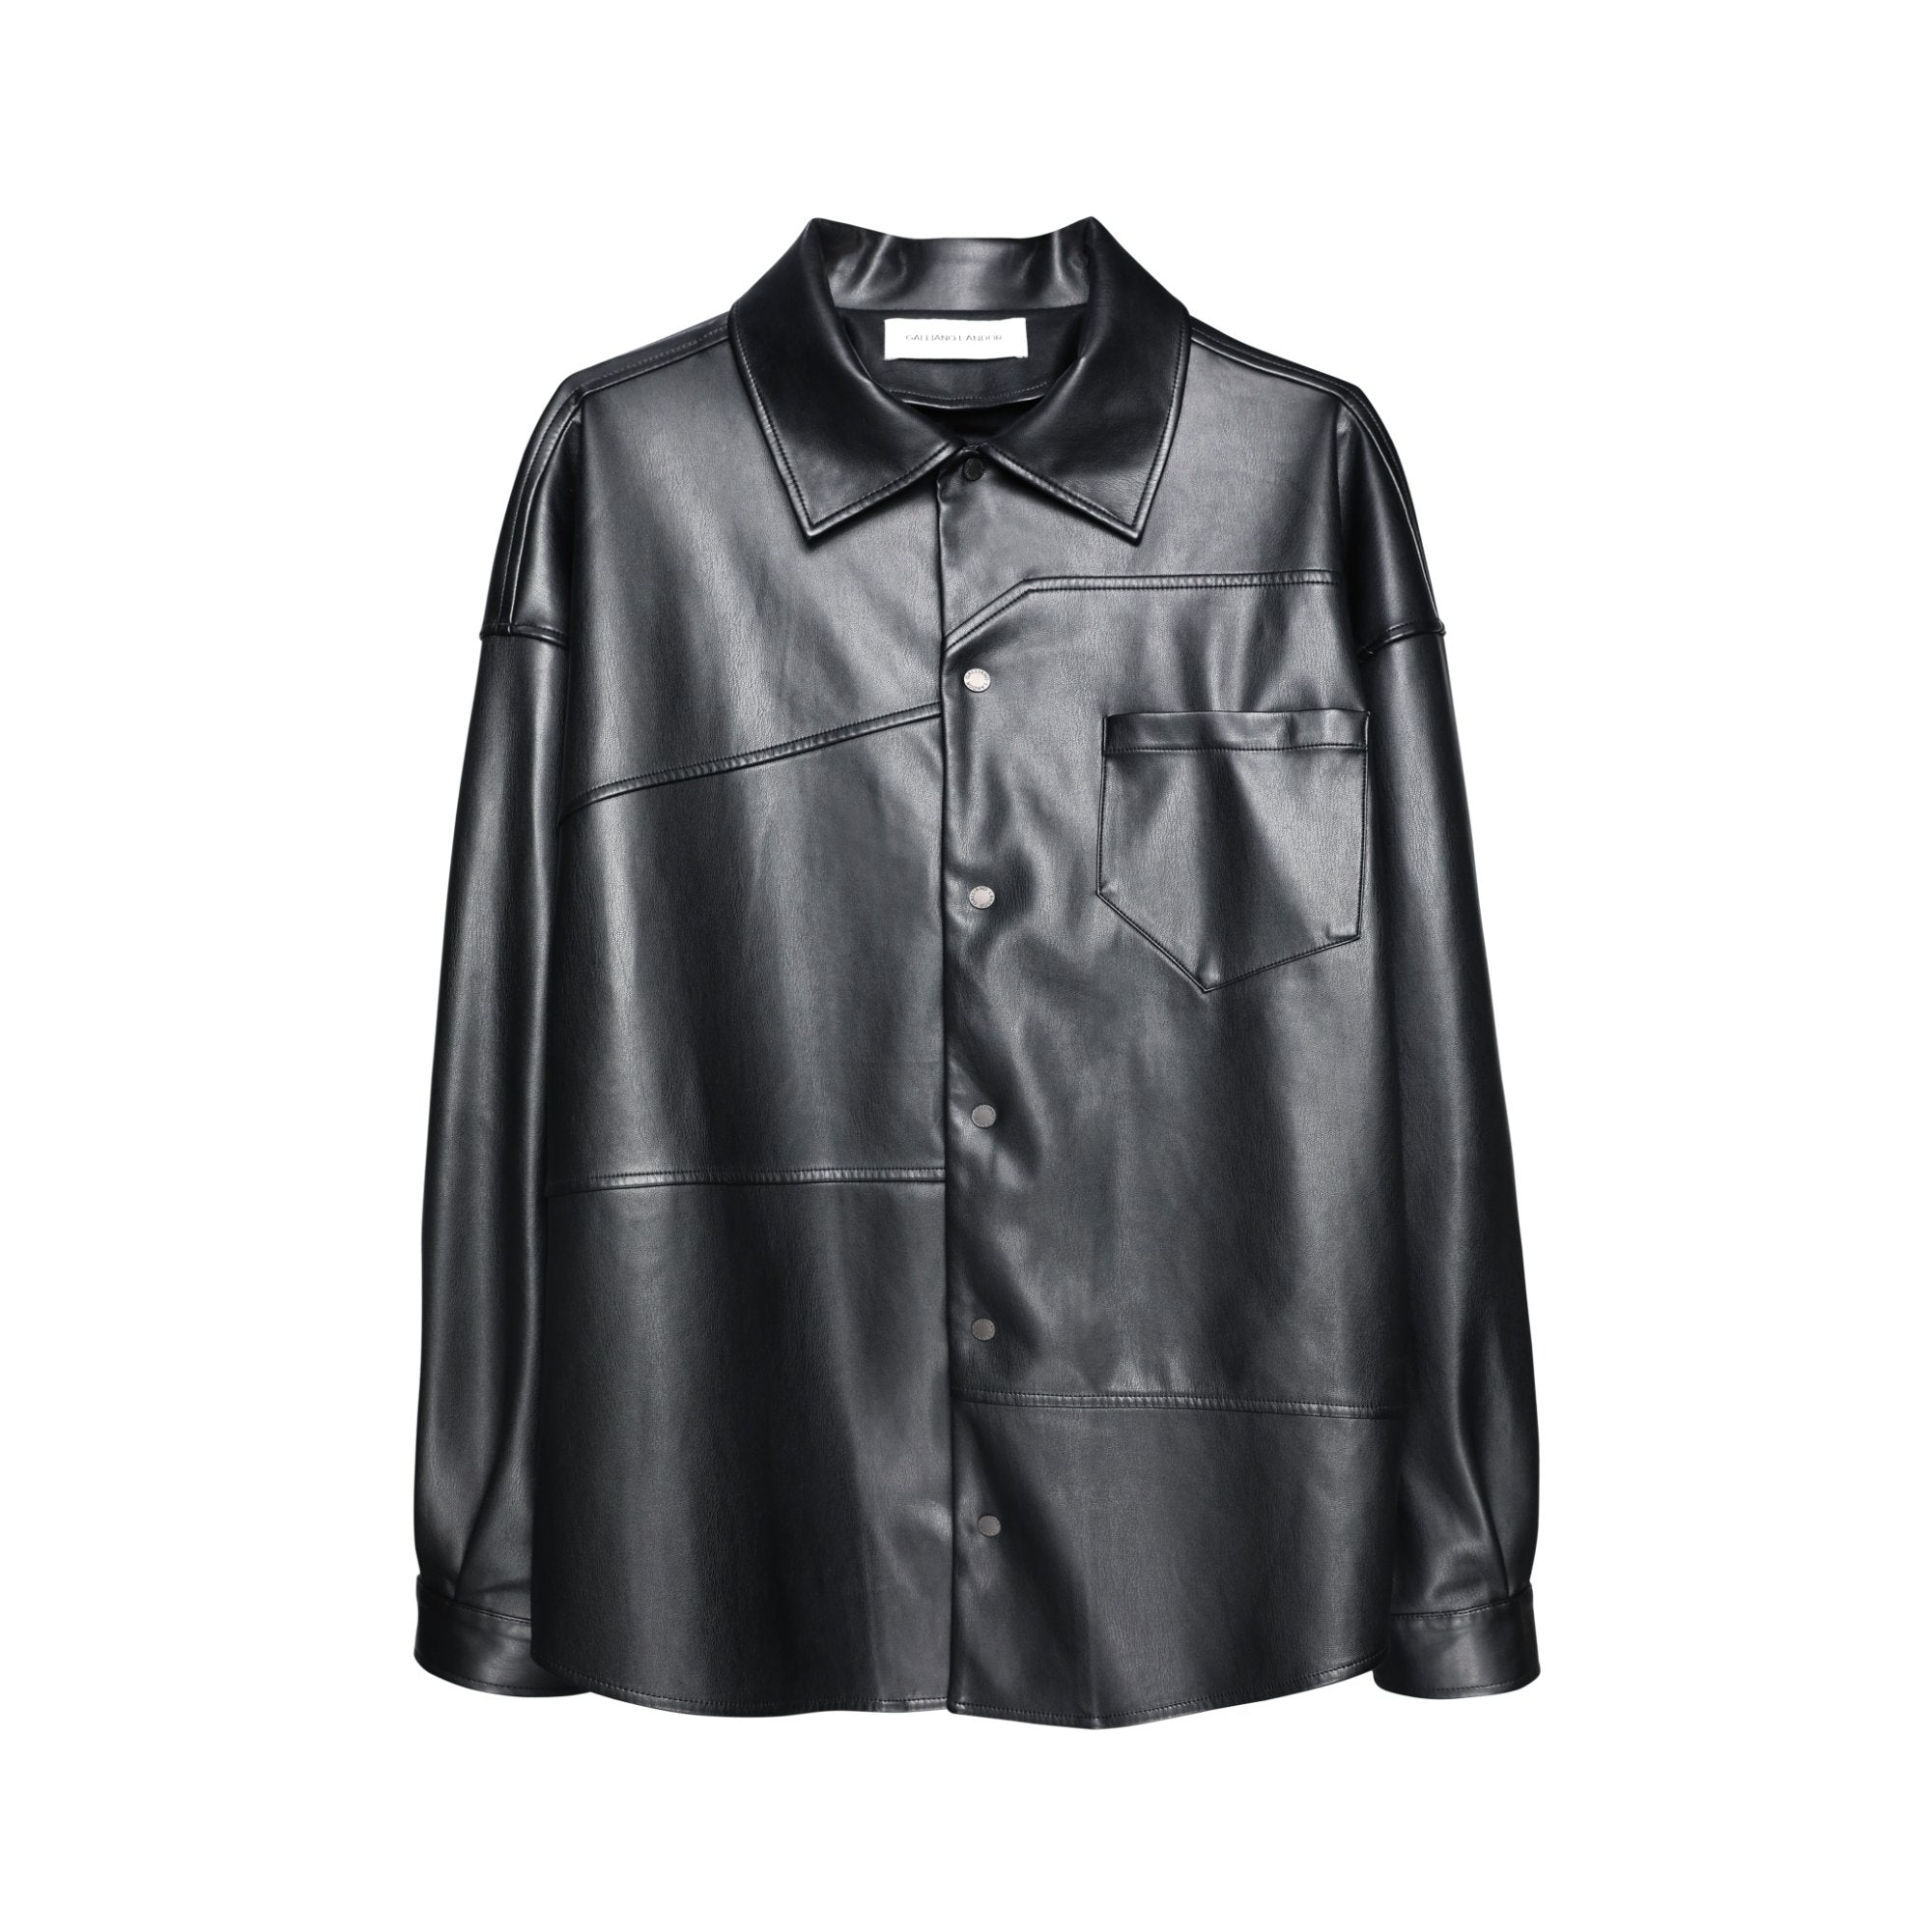 GALLIANO LANDOR Black Colored Patchwork Leather Shirt | MADA IN CHINA